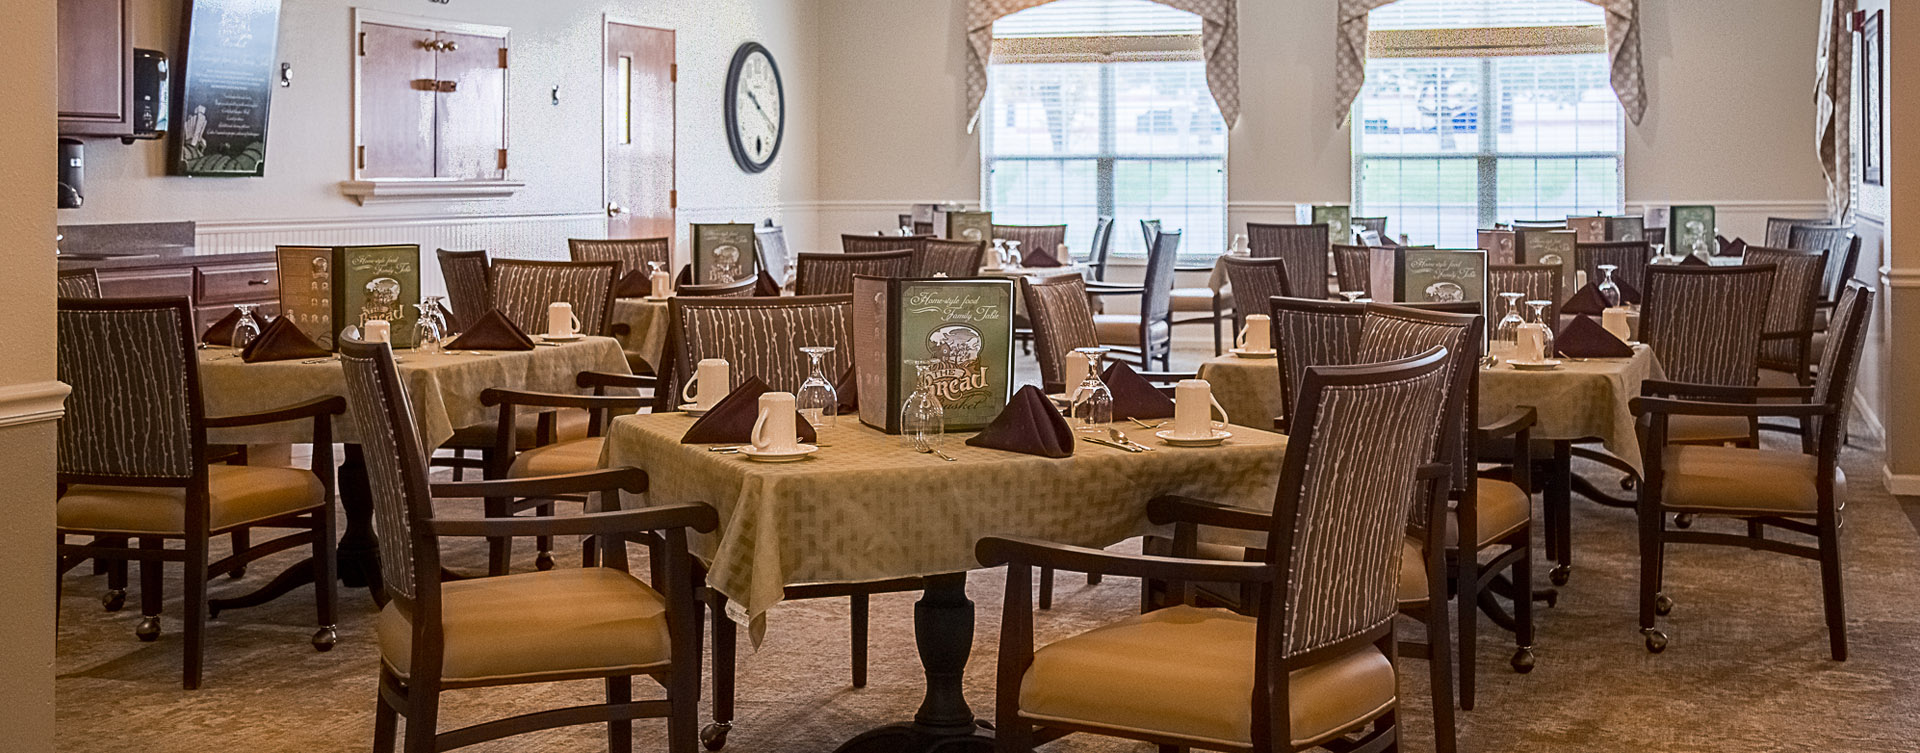 Enjoy restaurant -style meals served three times a day in our dining room at Bickford of Davenport